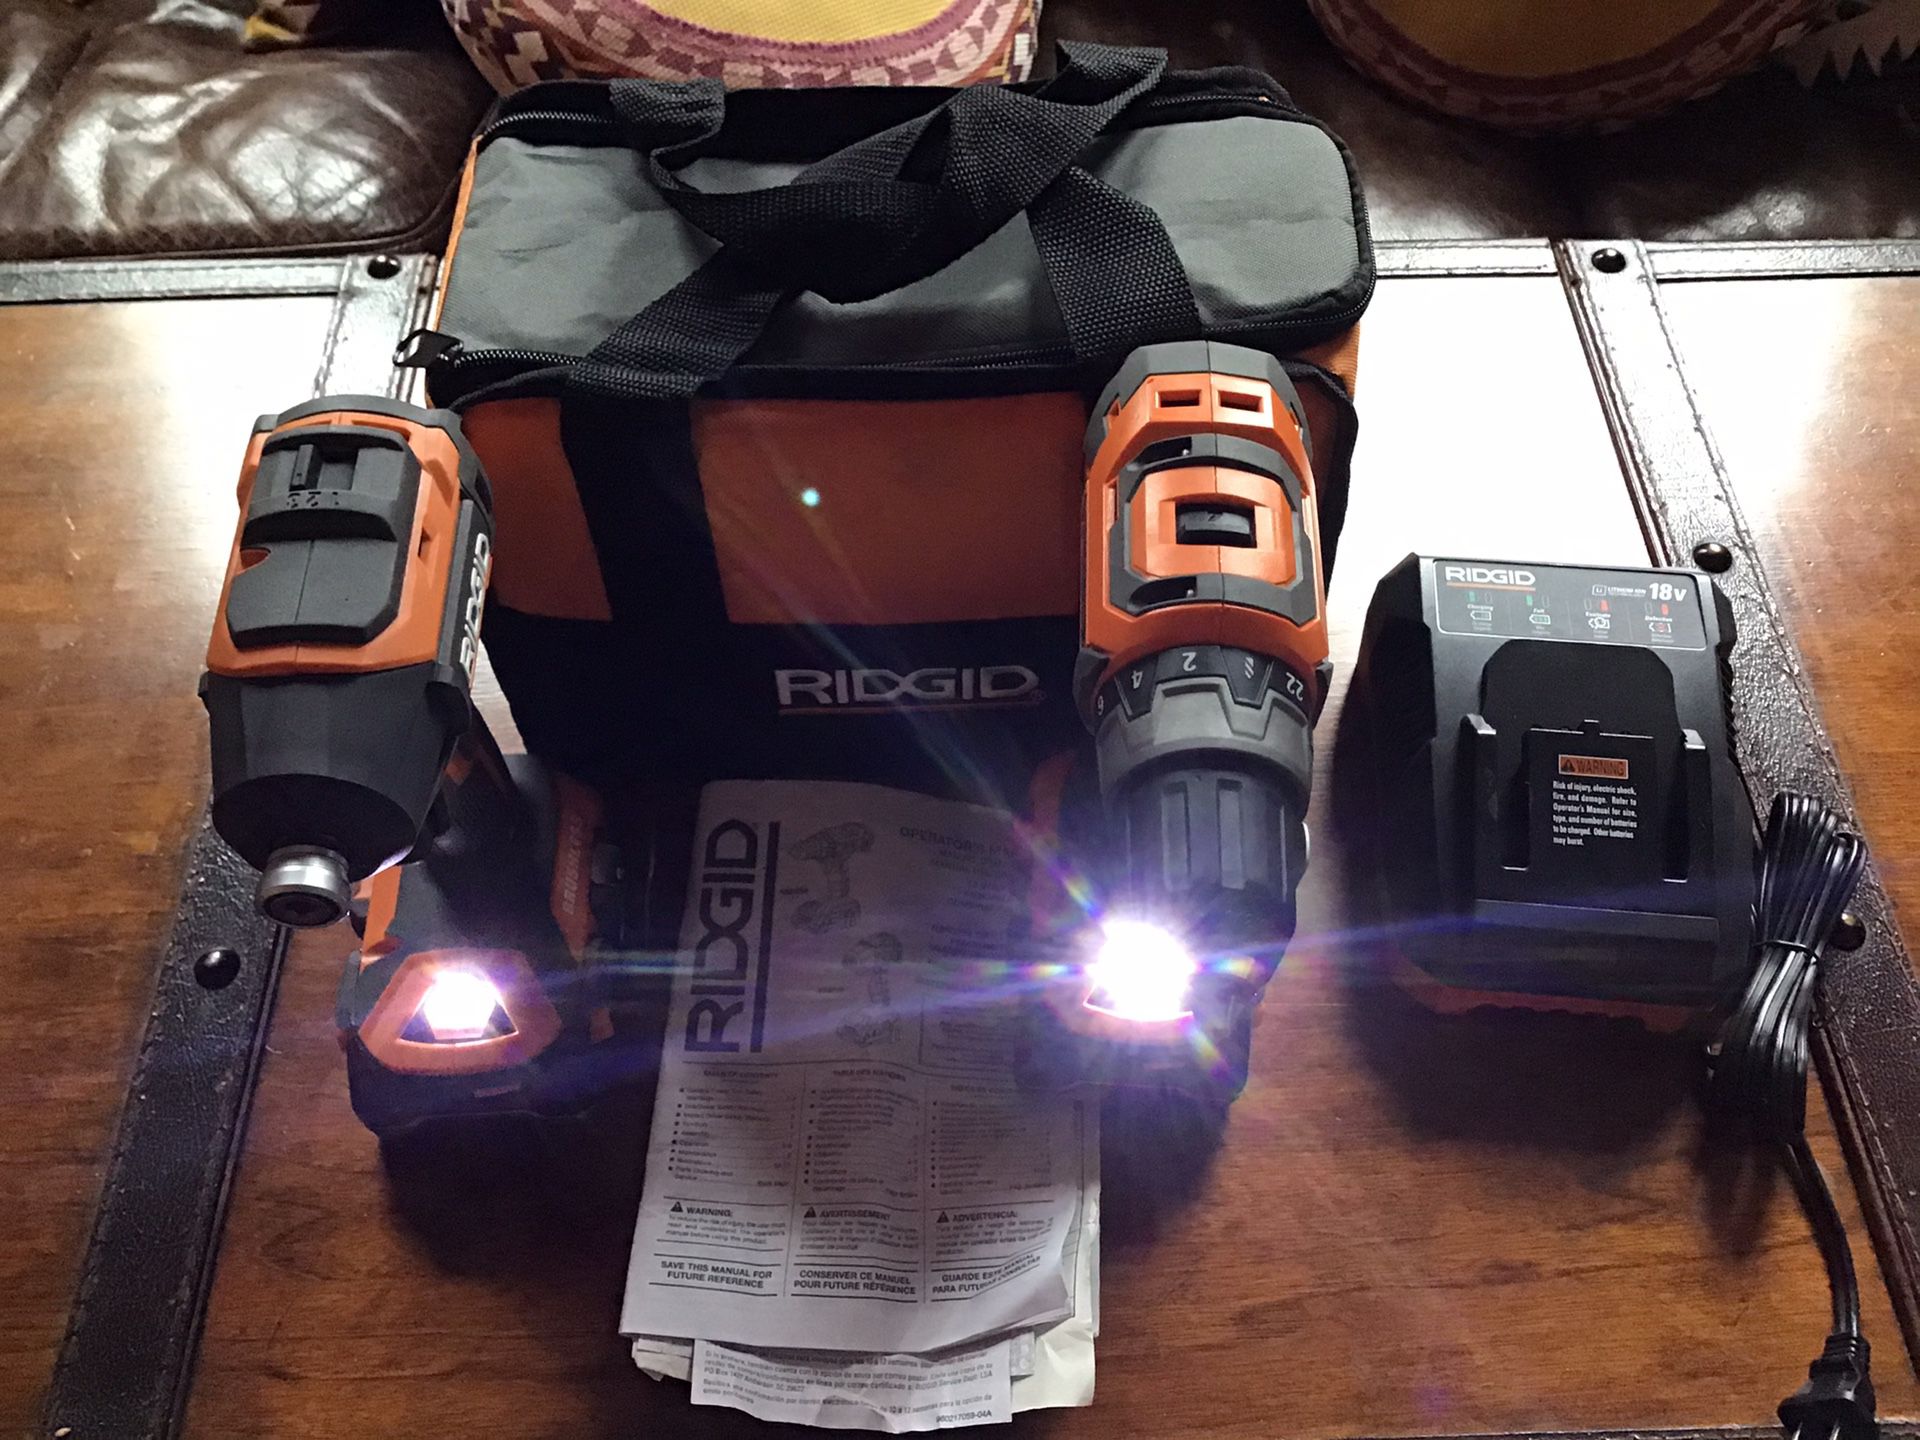 ‼️RIDGID GEN 5 X BRUSHLESS DRILL / DRIVER IMPACT COMBO KIT WITH 2 BATTERIES 🔋 🔋 AND CHARGER 🔌